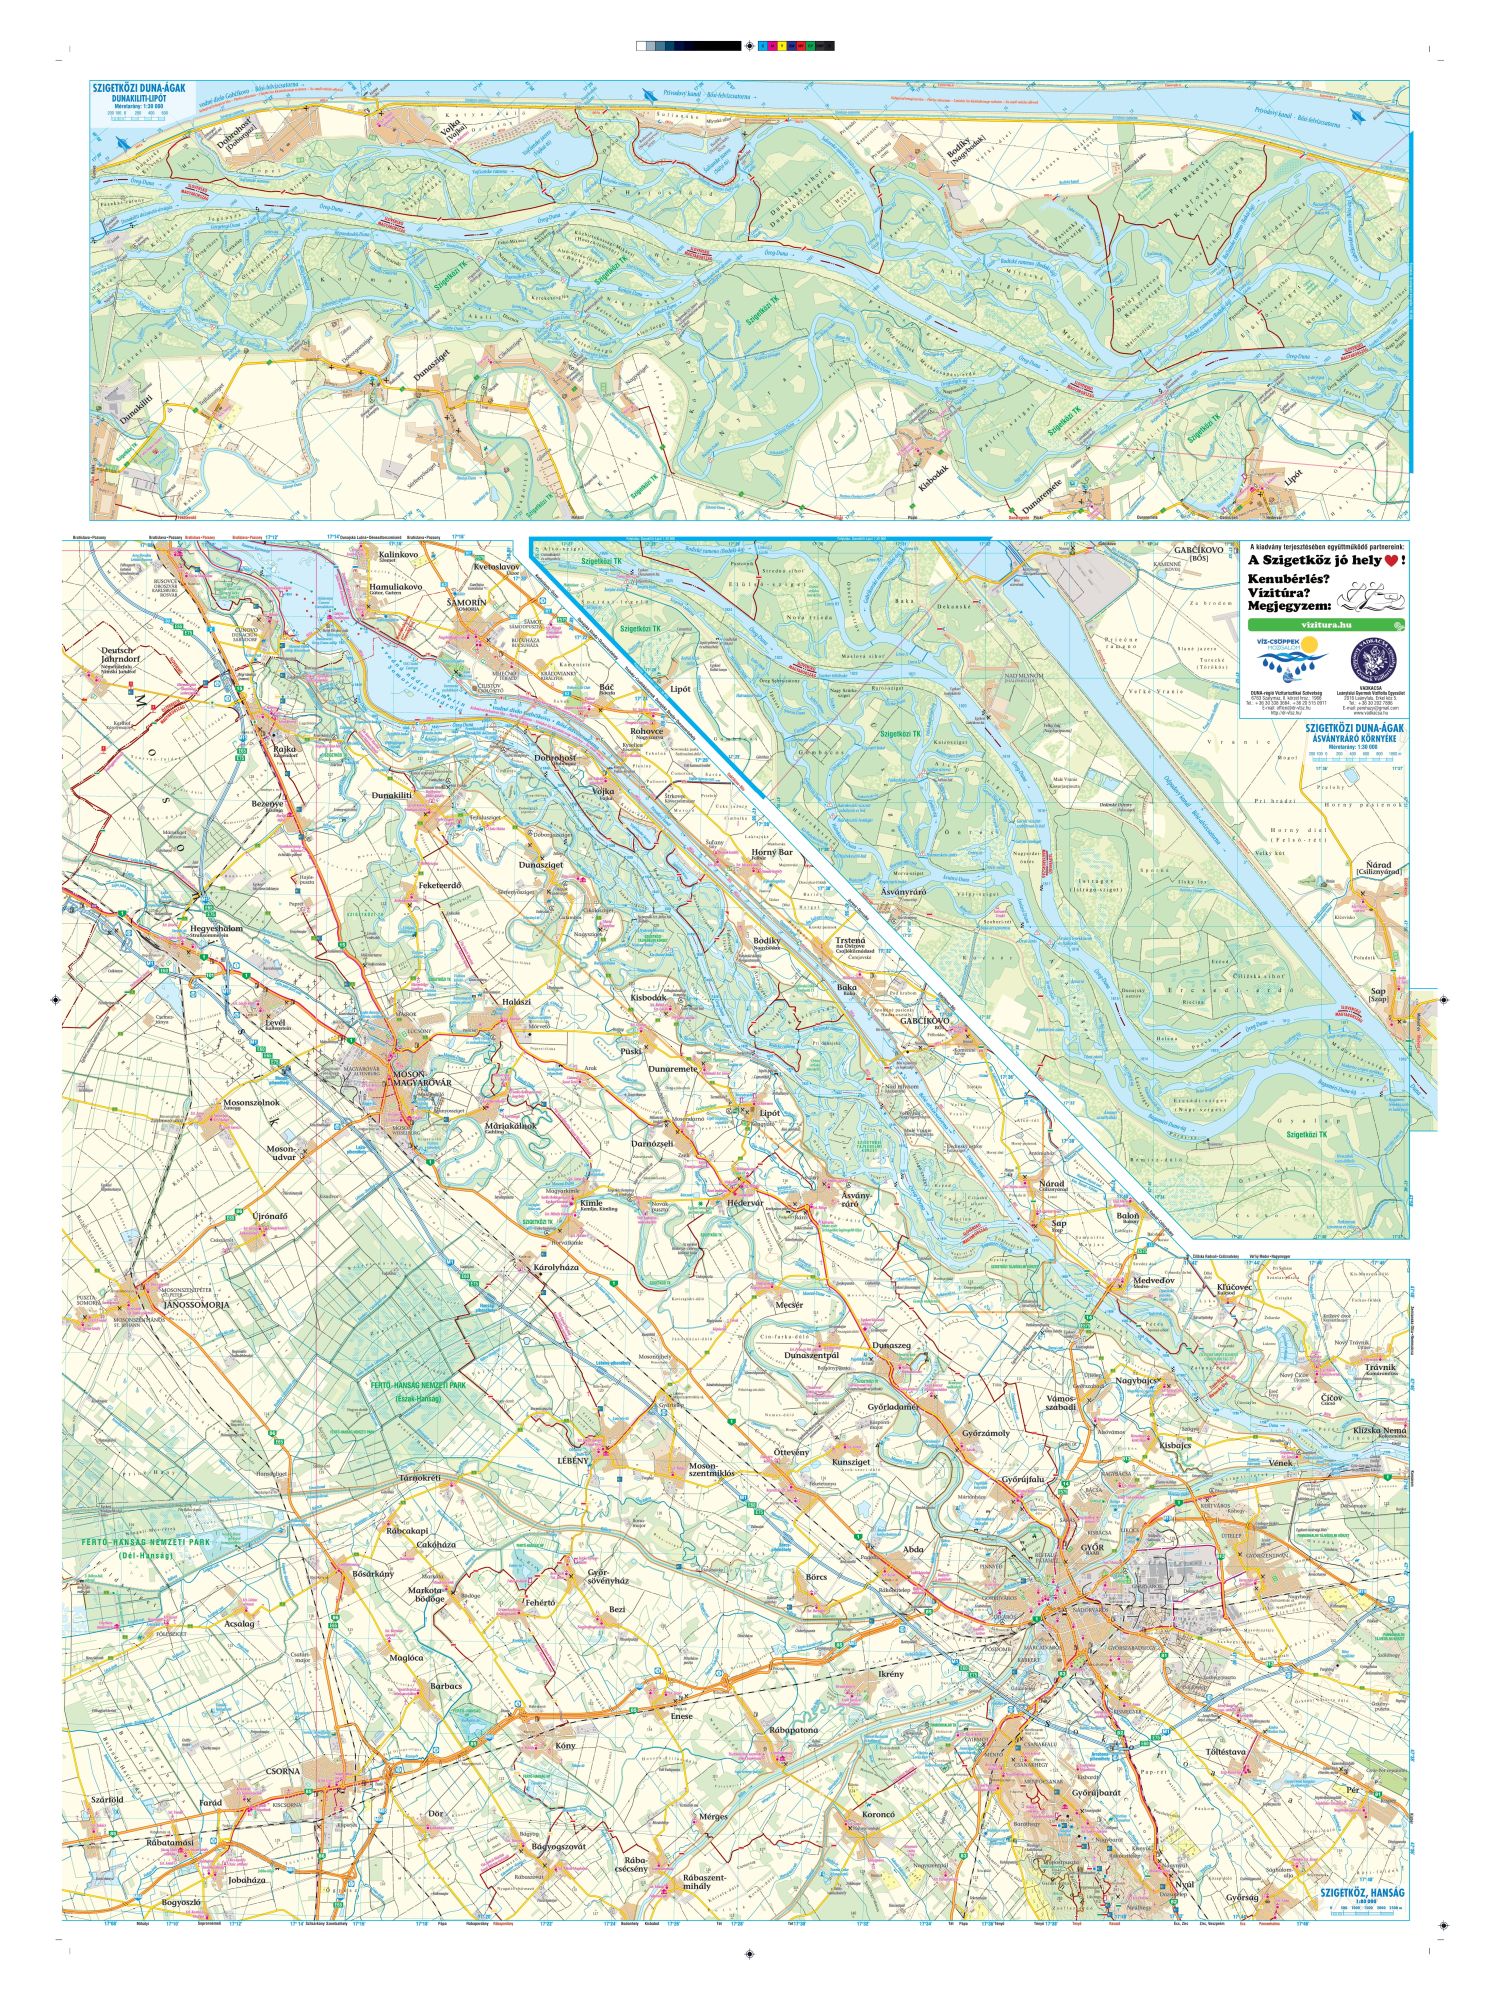 Area covered by the Szigetköz map 1:8000.000 / 1:30.000